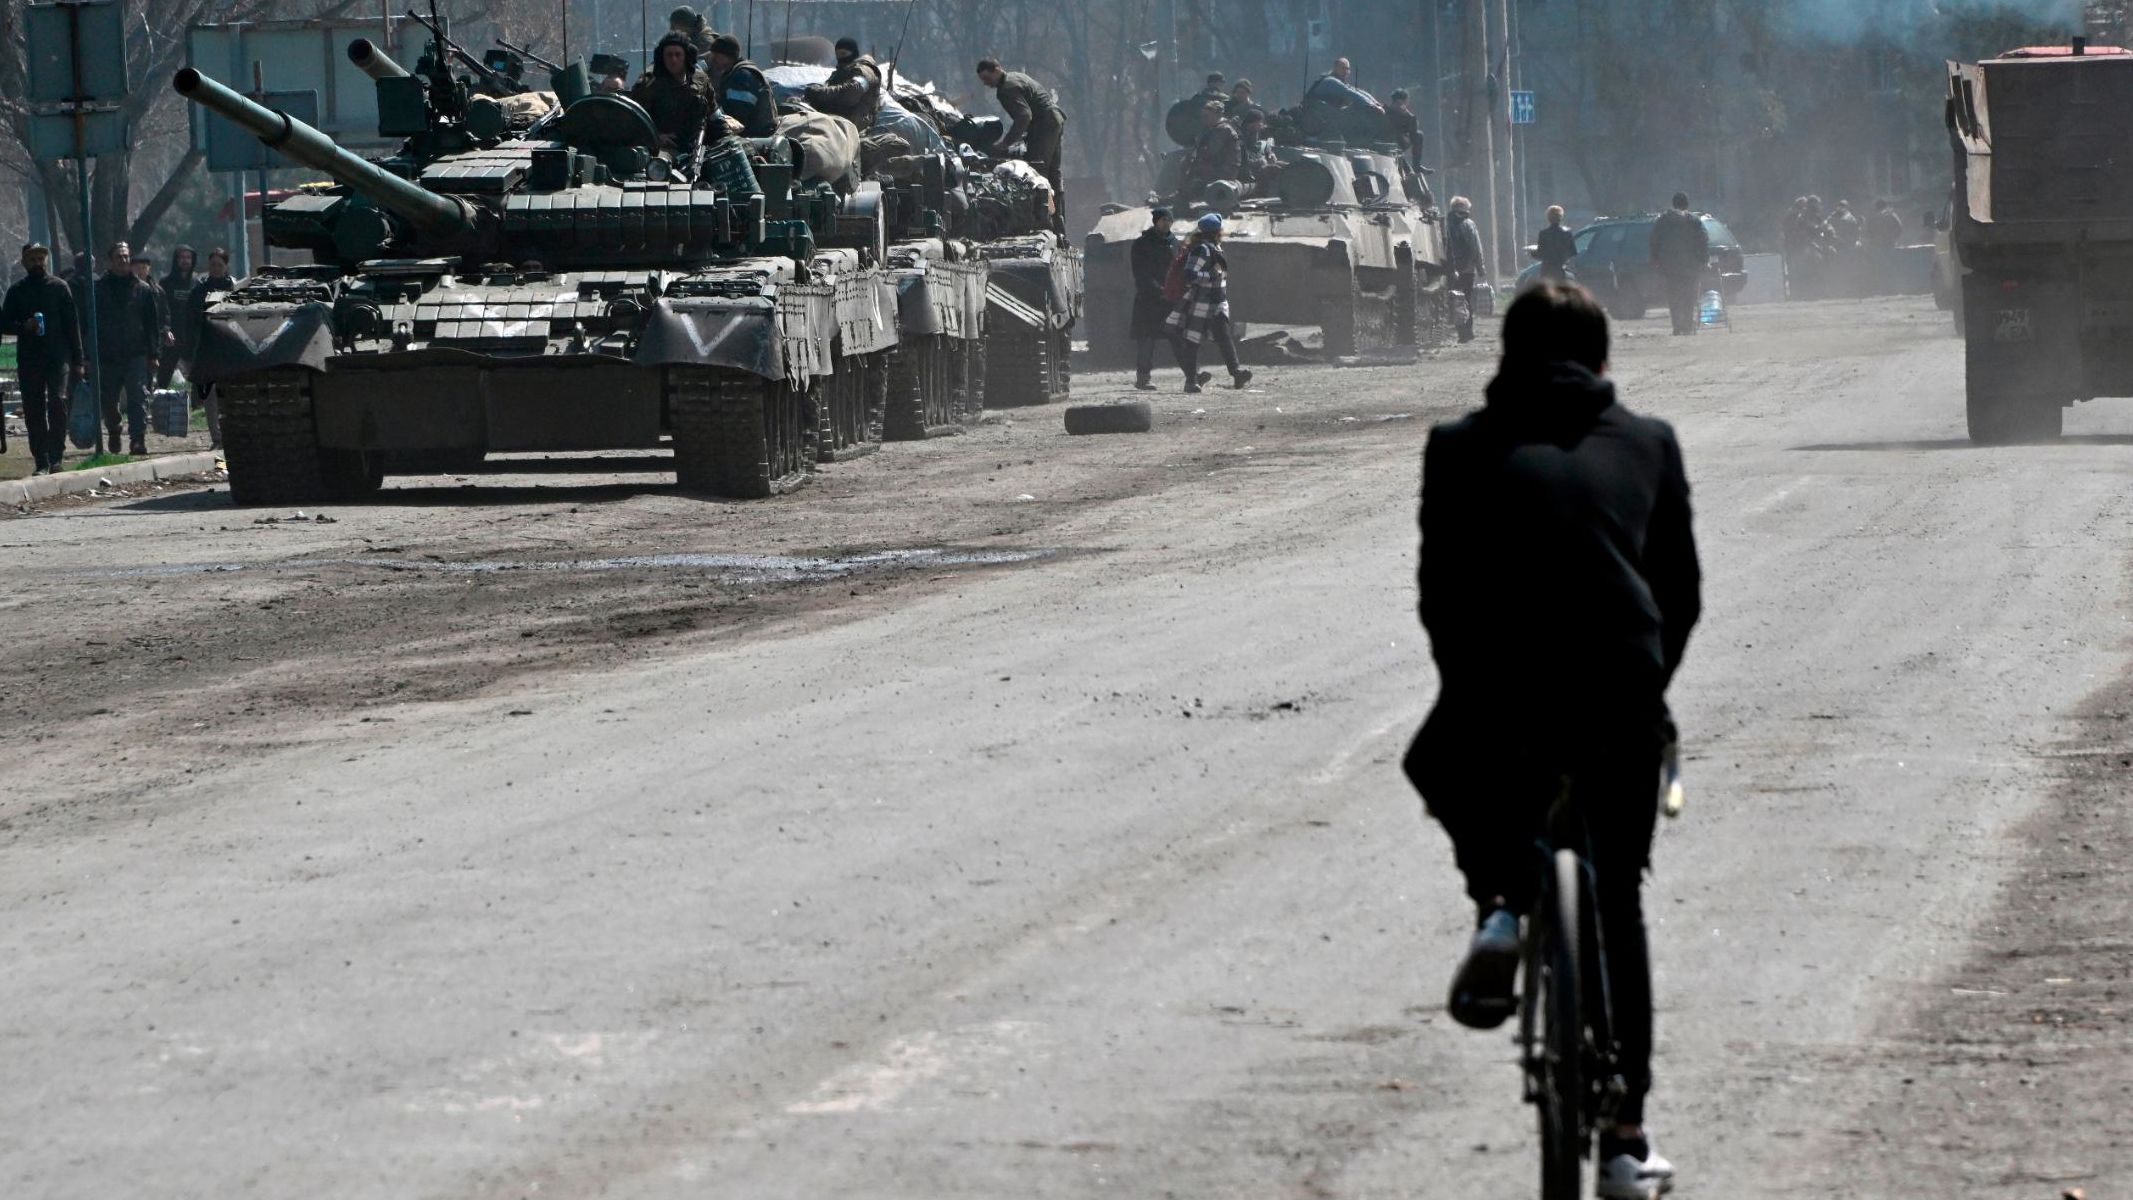 Russian forces are seen on the streets of Mariupol on April 15, 2022.